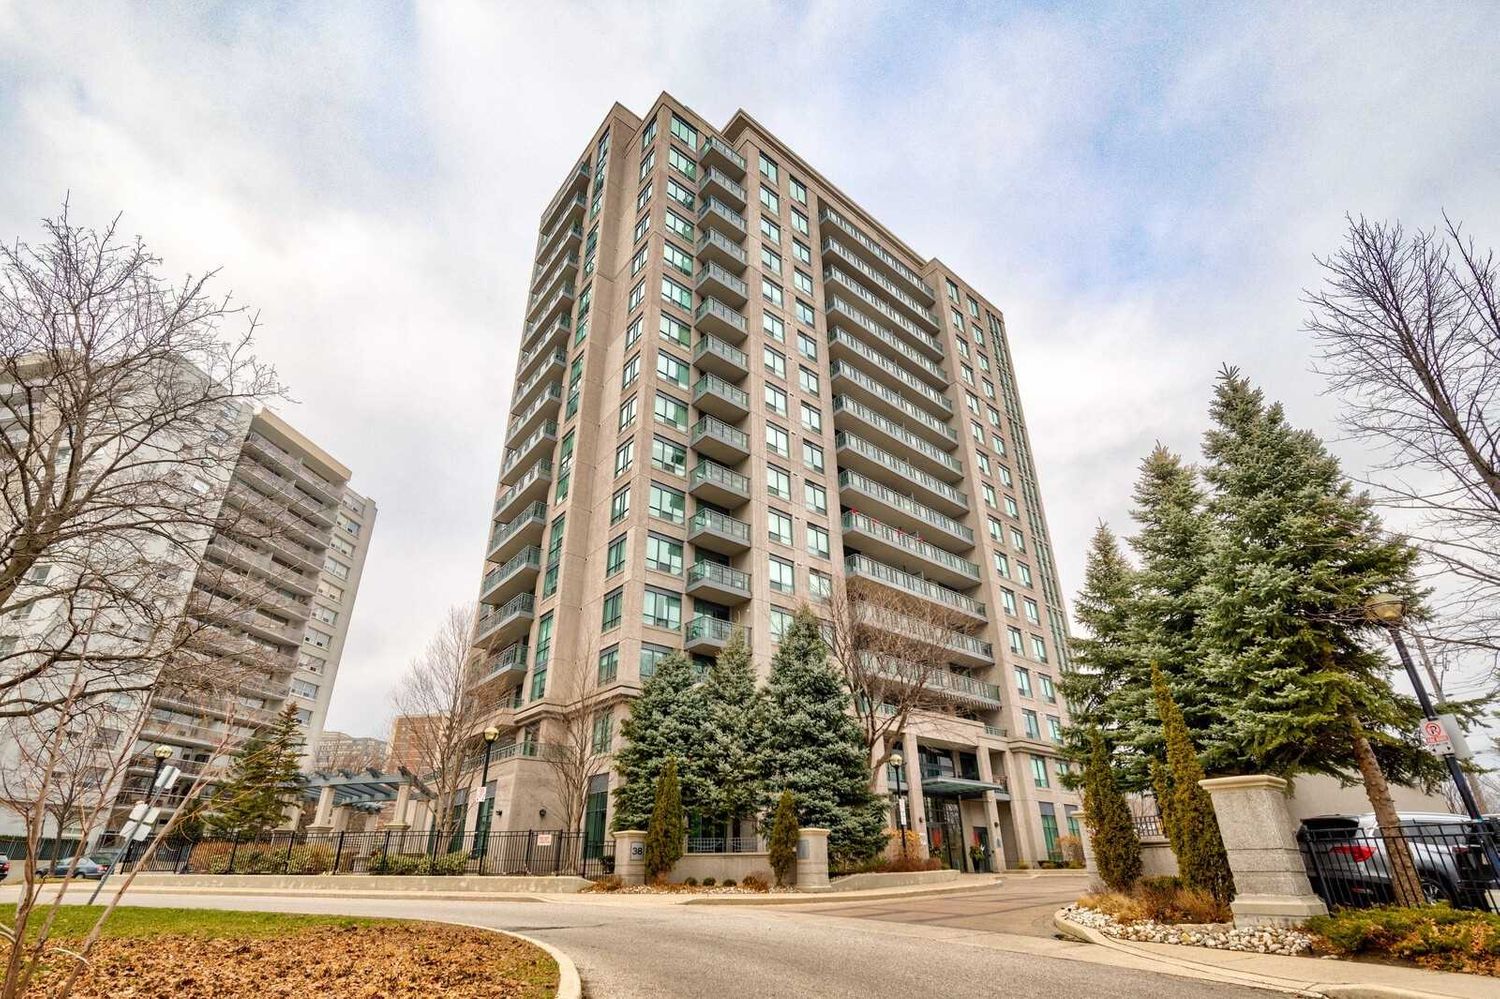 38 Fontenay Crt. This condo at The Fountains of Edenbridge Condos is located in  Etobicoke, Toronto - image #1 of 2 by Strata.ca